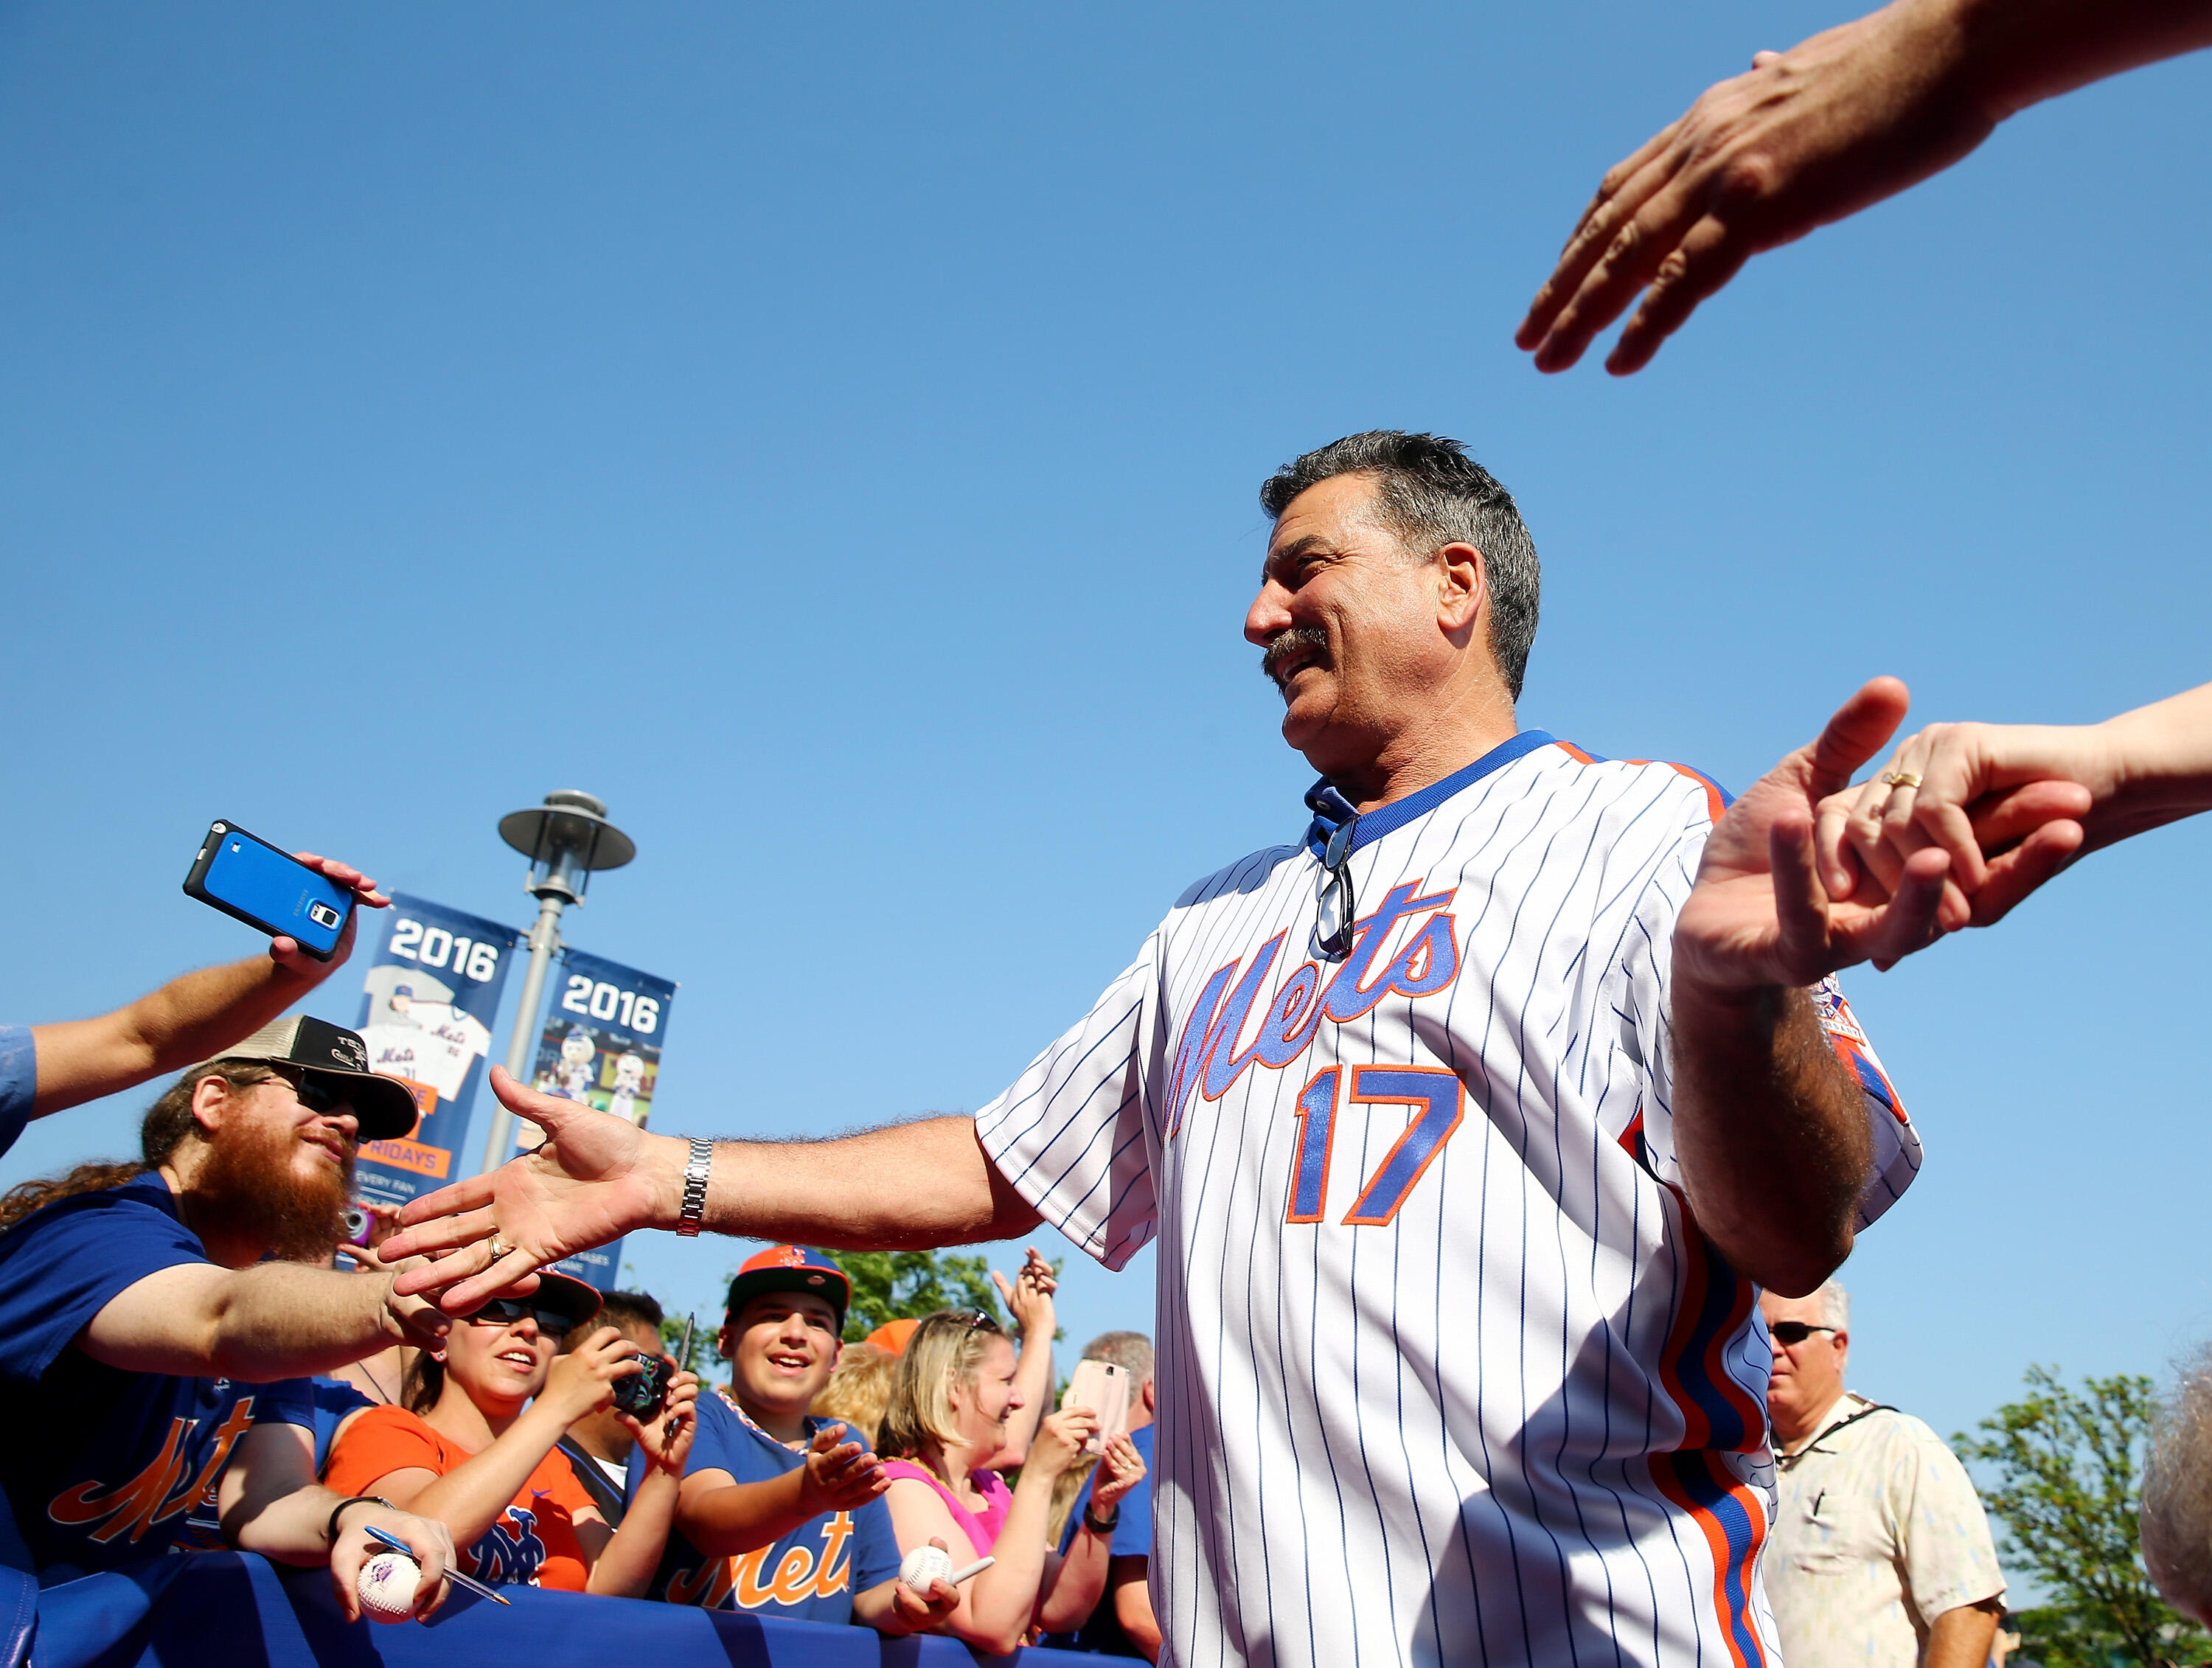 NEW YORK, NY - MAY 28:  Keith Hernandez #17 of the 1986 New York Mets greets the fans as he walks the red carpet before the game between the New York Mets and the Los Angeles Dodgers at Citi Field on May 28, 2016 in the Flushing neighborhood of the Queens